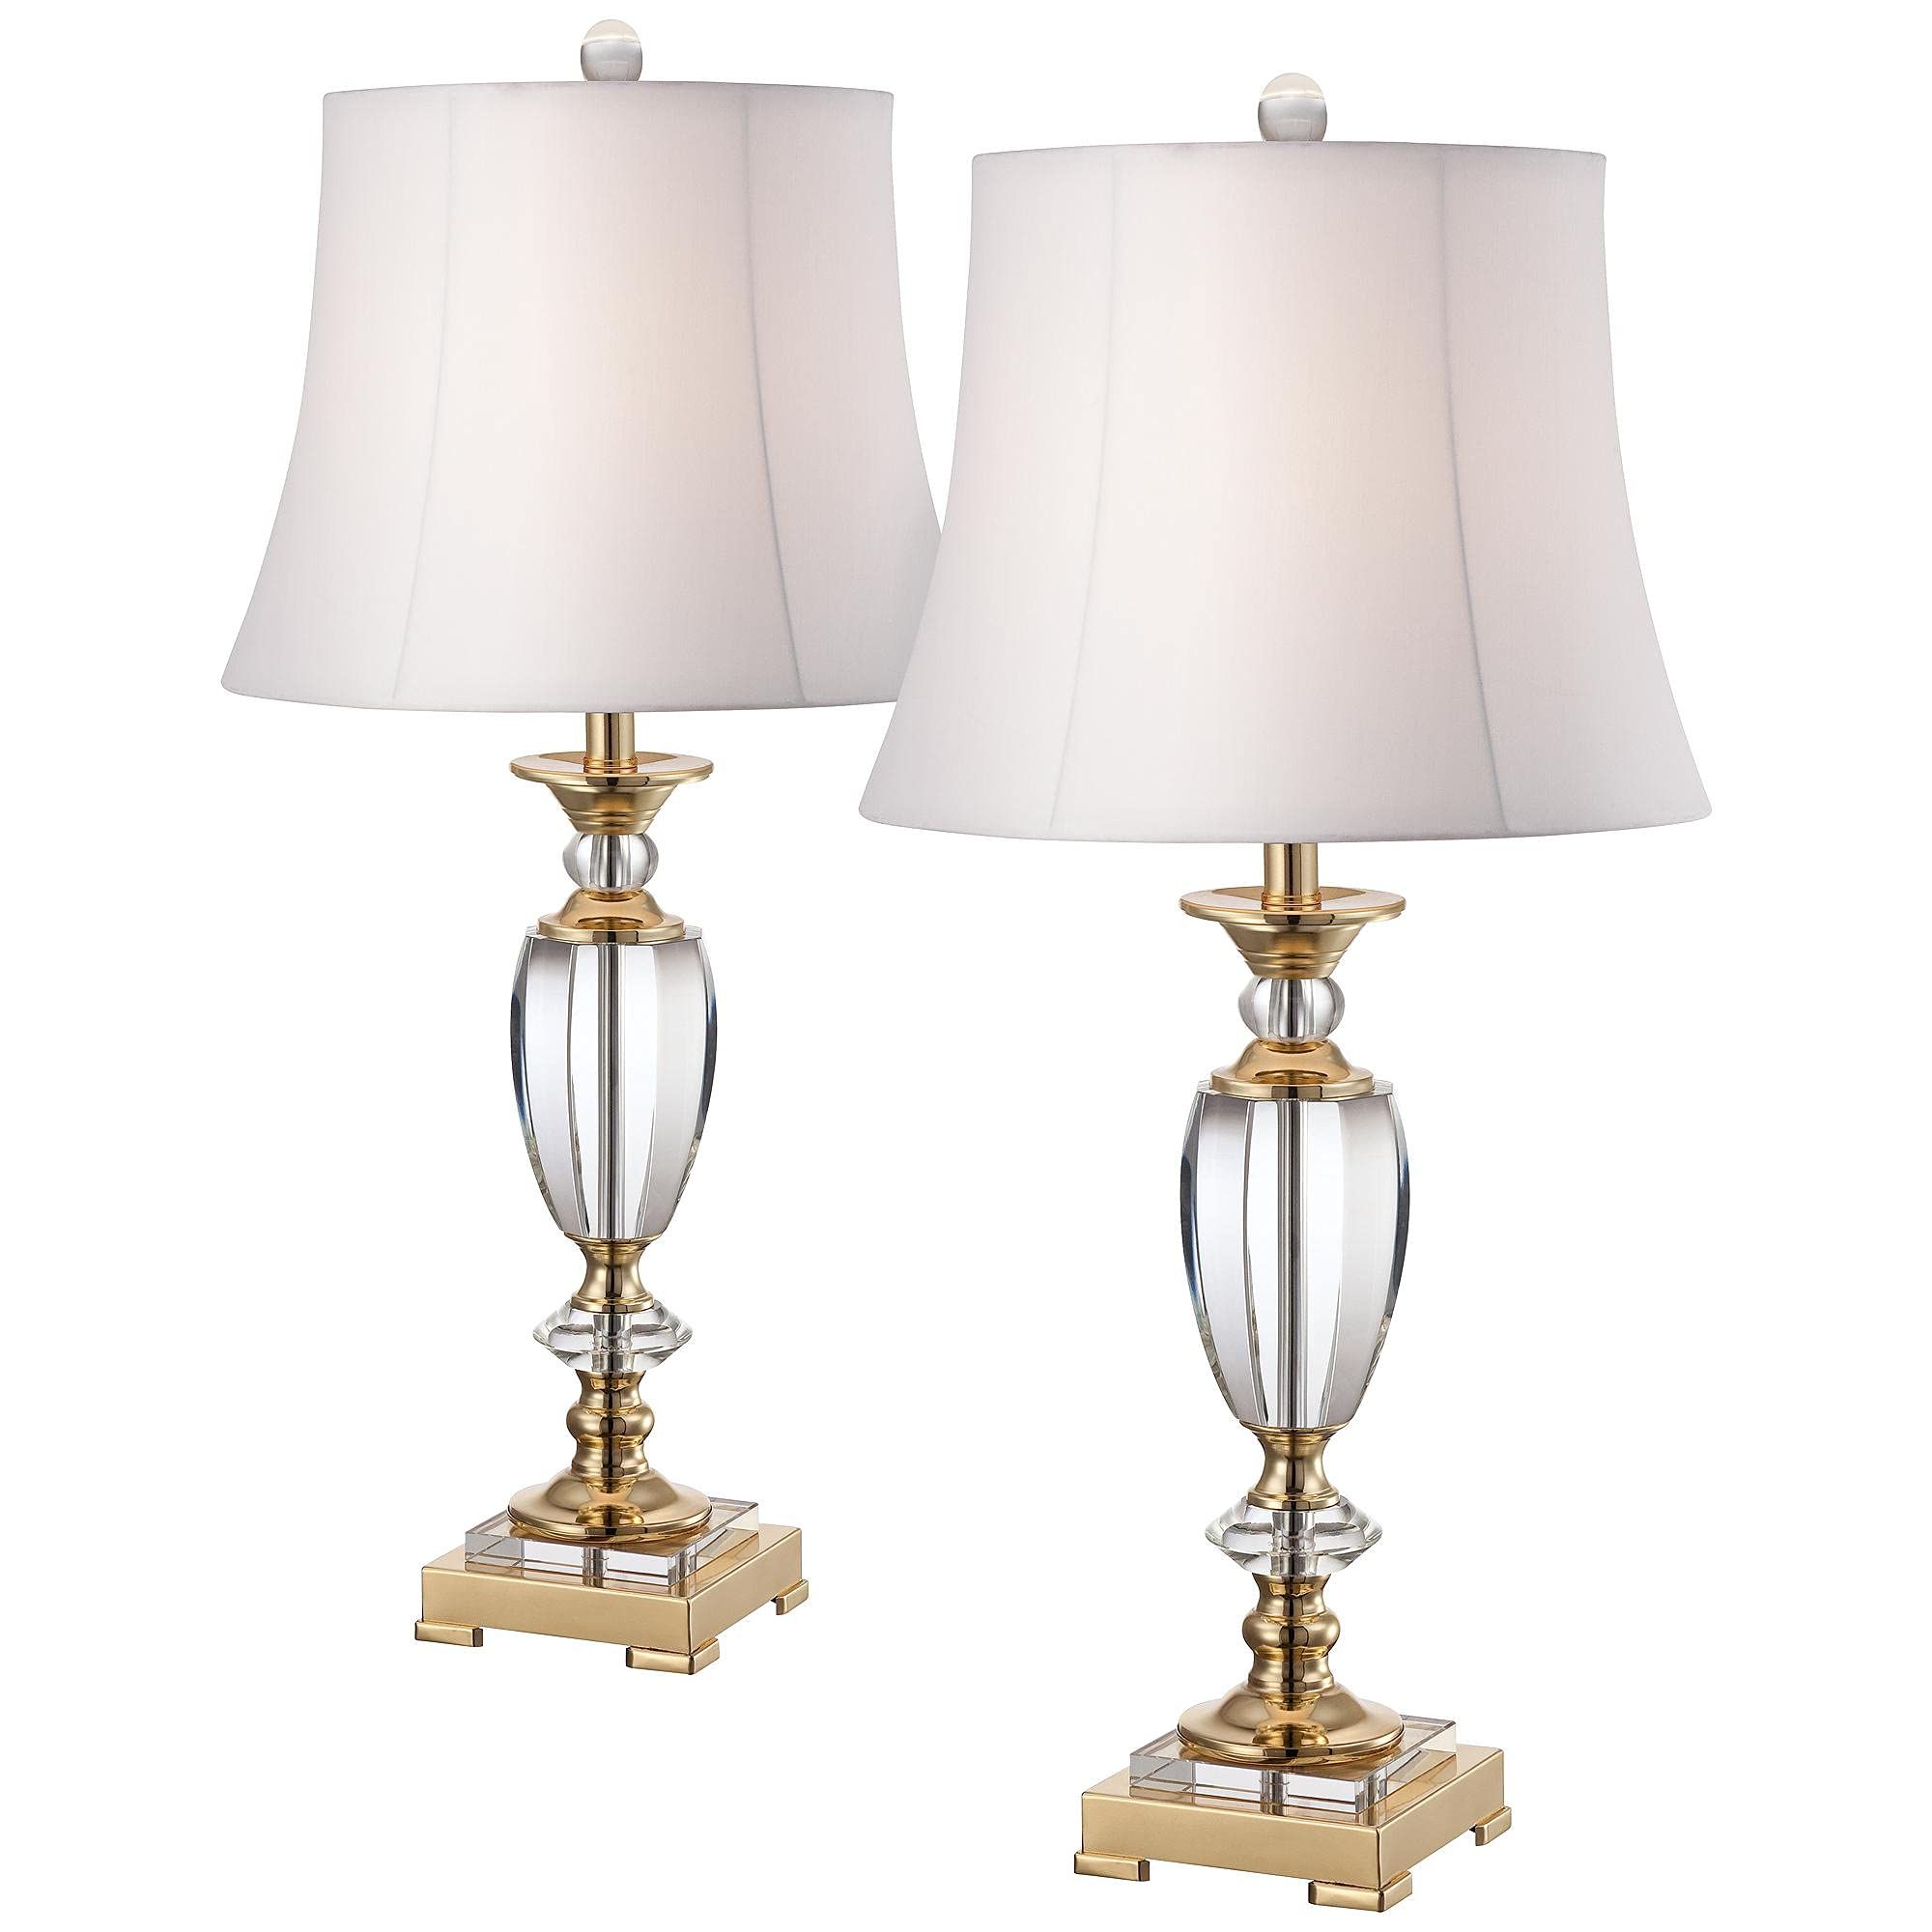 Current Wide Crystal Standing Lamps Inside Vienna Full Spectrum Traditional Table Lamps 28 3/4" Tall Set Of 2 Brass  Clear Faceted Crystal White Fabric Bell Shade Decor For Living Room Bedroom  House Bedside Nightstand Home Office Family – – Amazon (View 15 of 15)